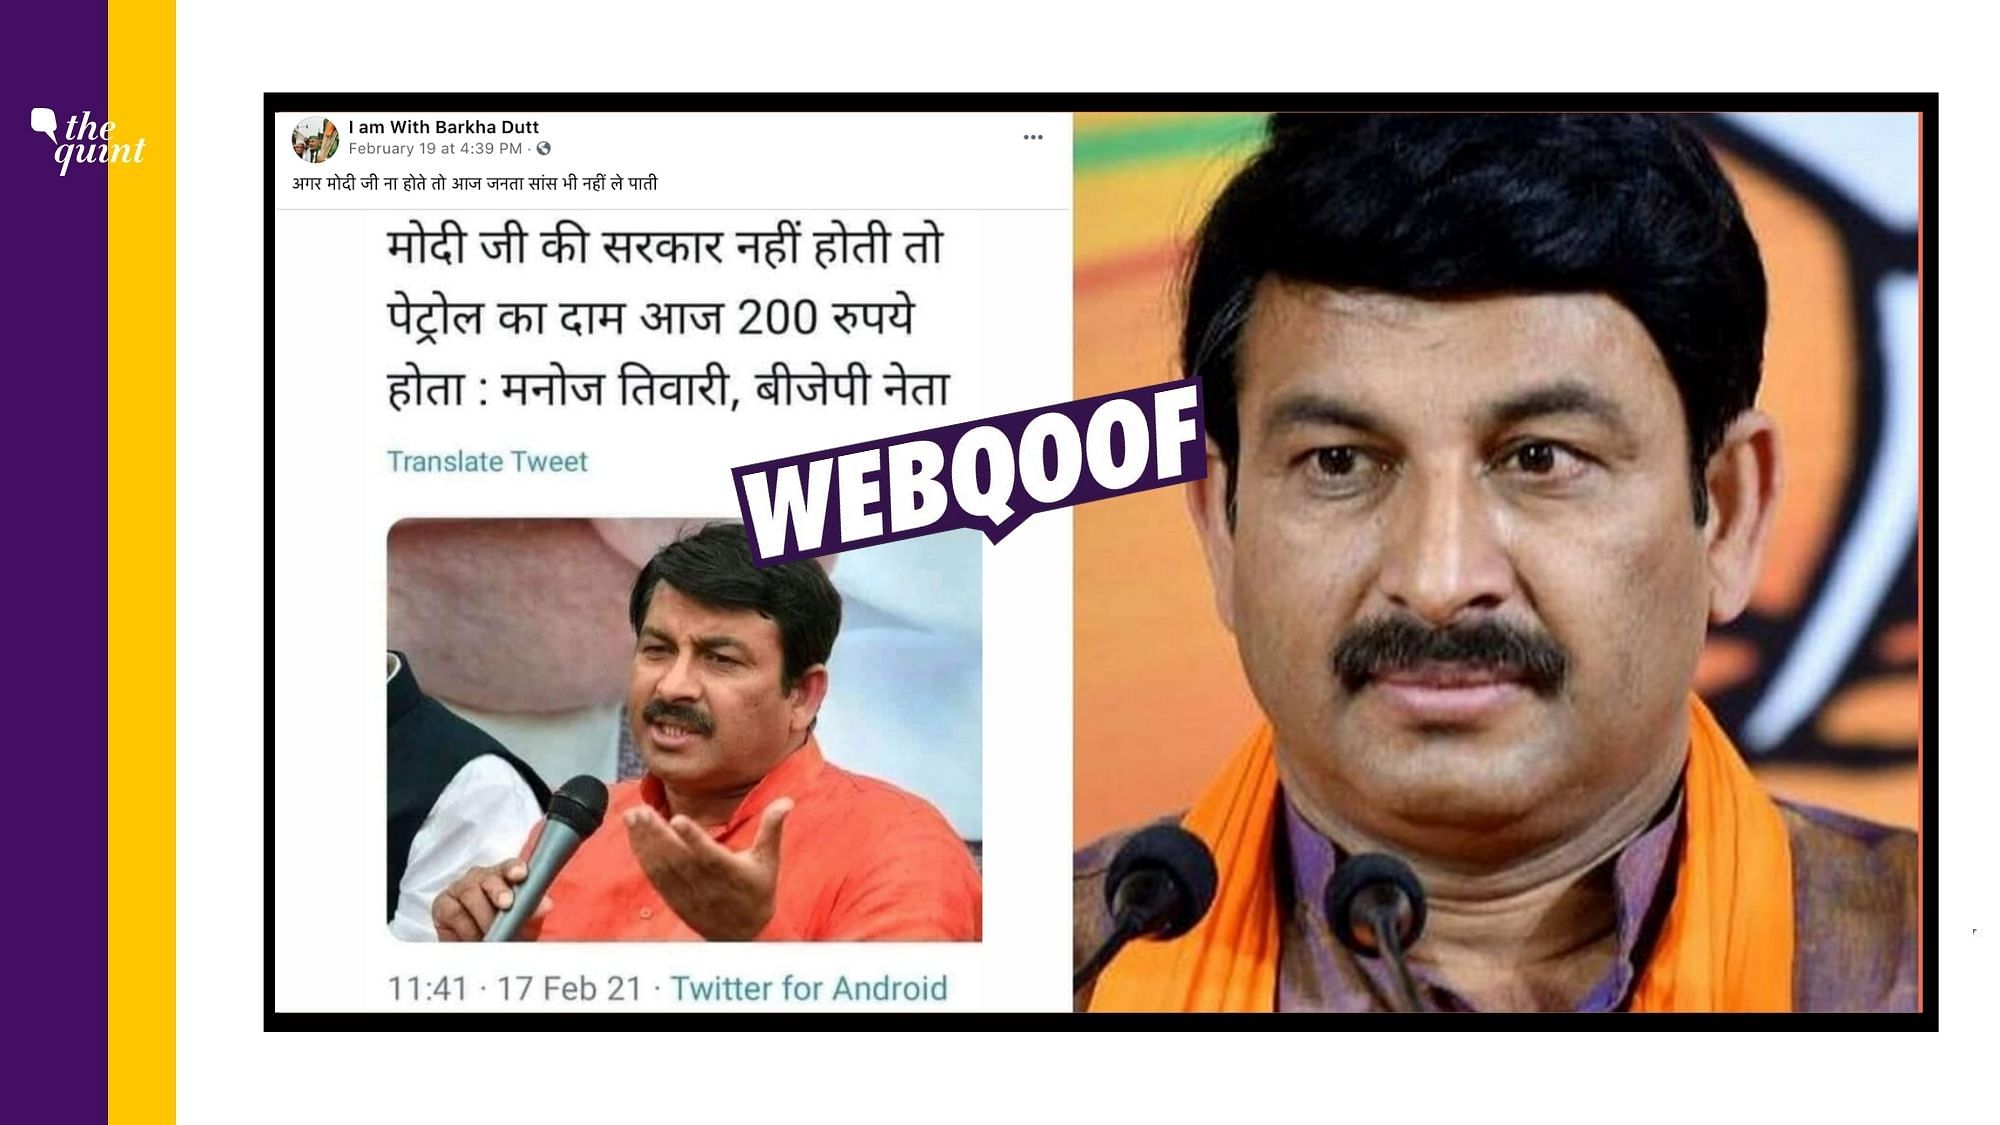 A fake quote attributed to BJP leader and former Delhi BJP Chief Manoj Tiwari that was shared by a parody Twitter account was amplified by many as a real comment by the leader.